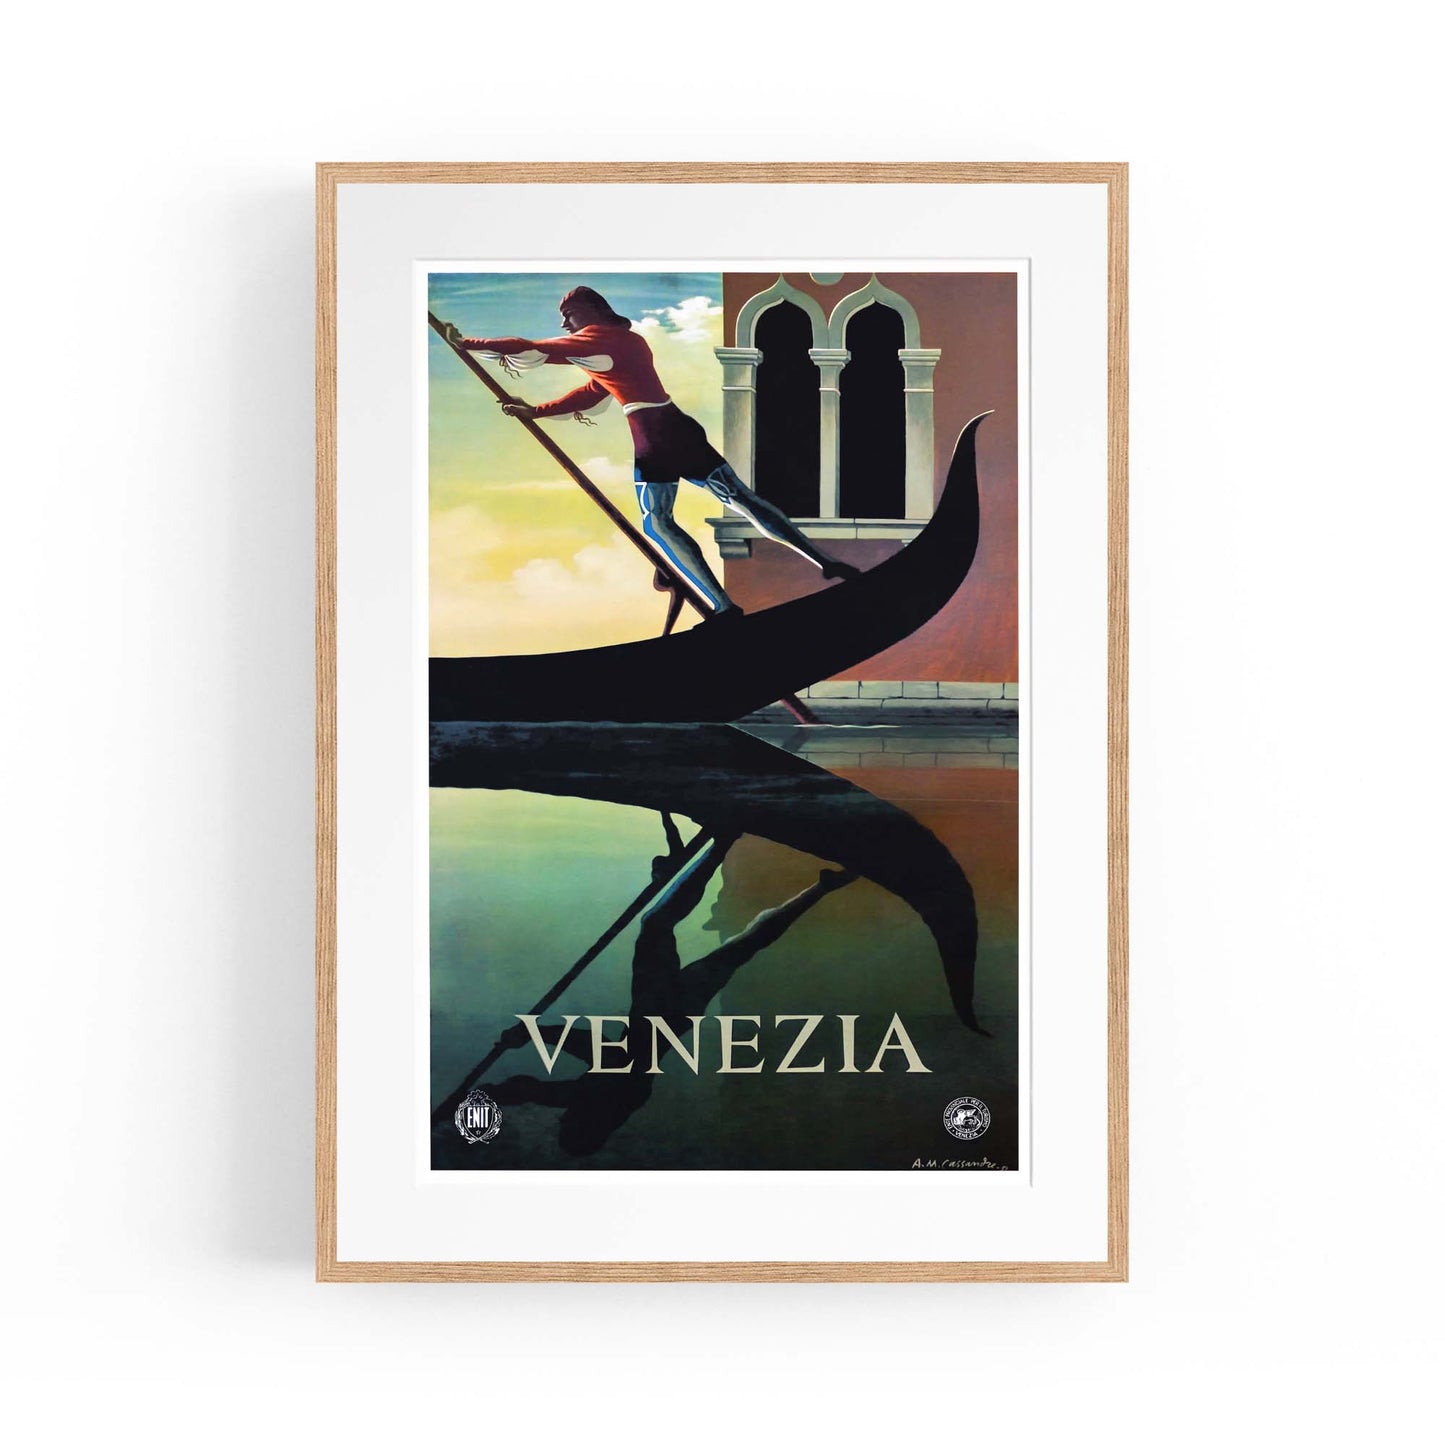 Venice Italy Vintage Travel Advert Wall Art - The Affordable Art Company